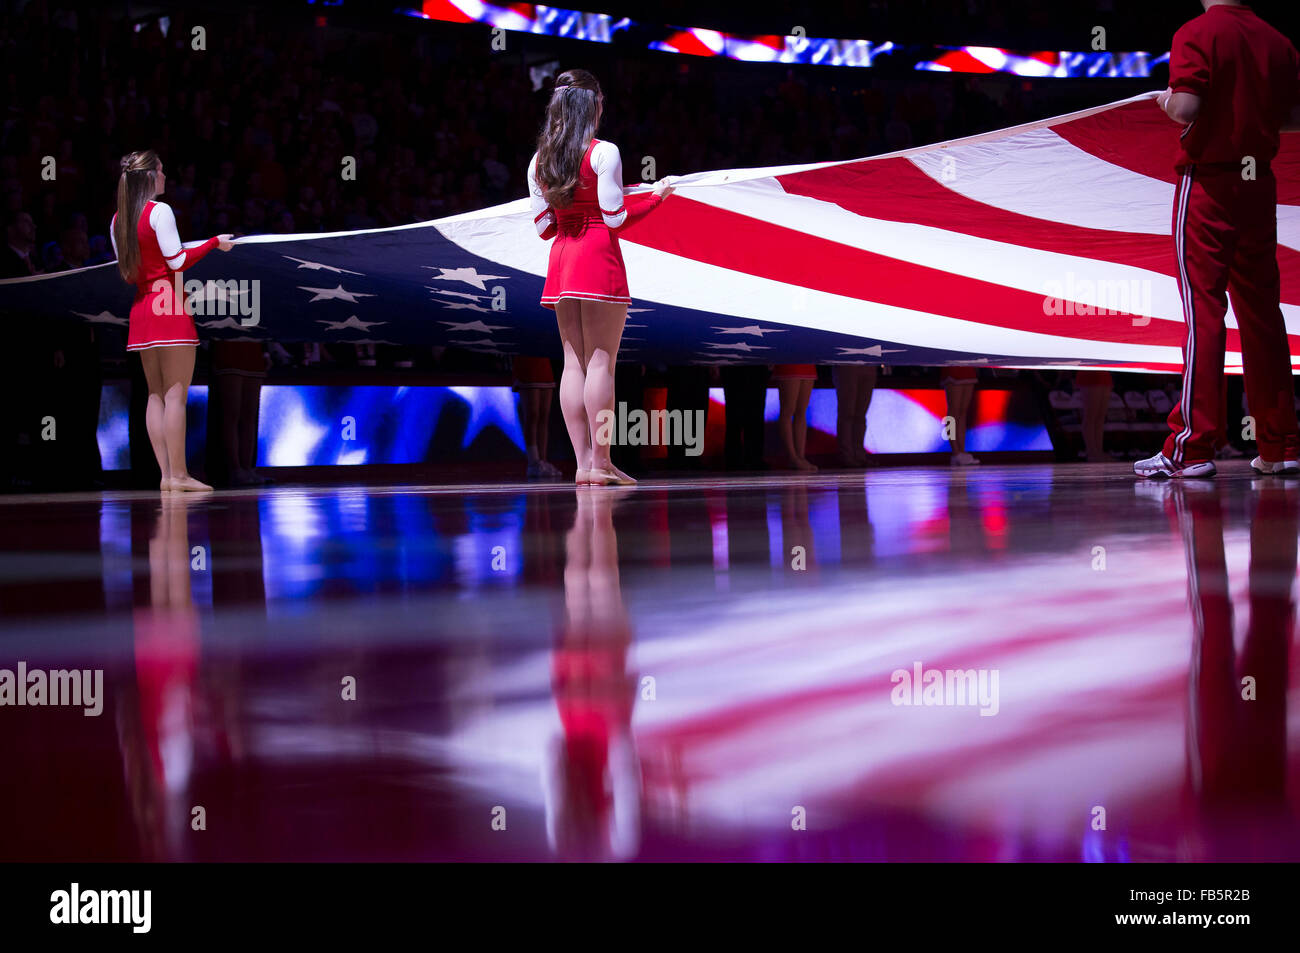 Madison, WI, USA. 9th Jan, 2016. Wisconsin cheerleaders hold the American flag during the National Anthem prior to the NCAA Basketball game between the Maryland Terrapins and the Wisconsin Badgers at the Kohl Center in Madison, WI. Maryland defeated Wisconsin 63-60. John Fisher/CSM/Alamy Live News Stock Photo